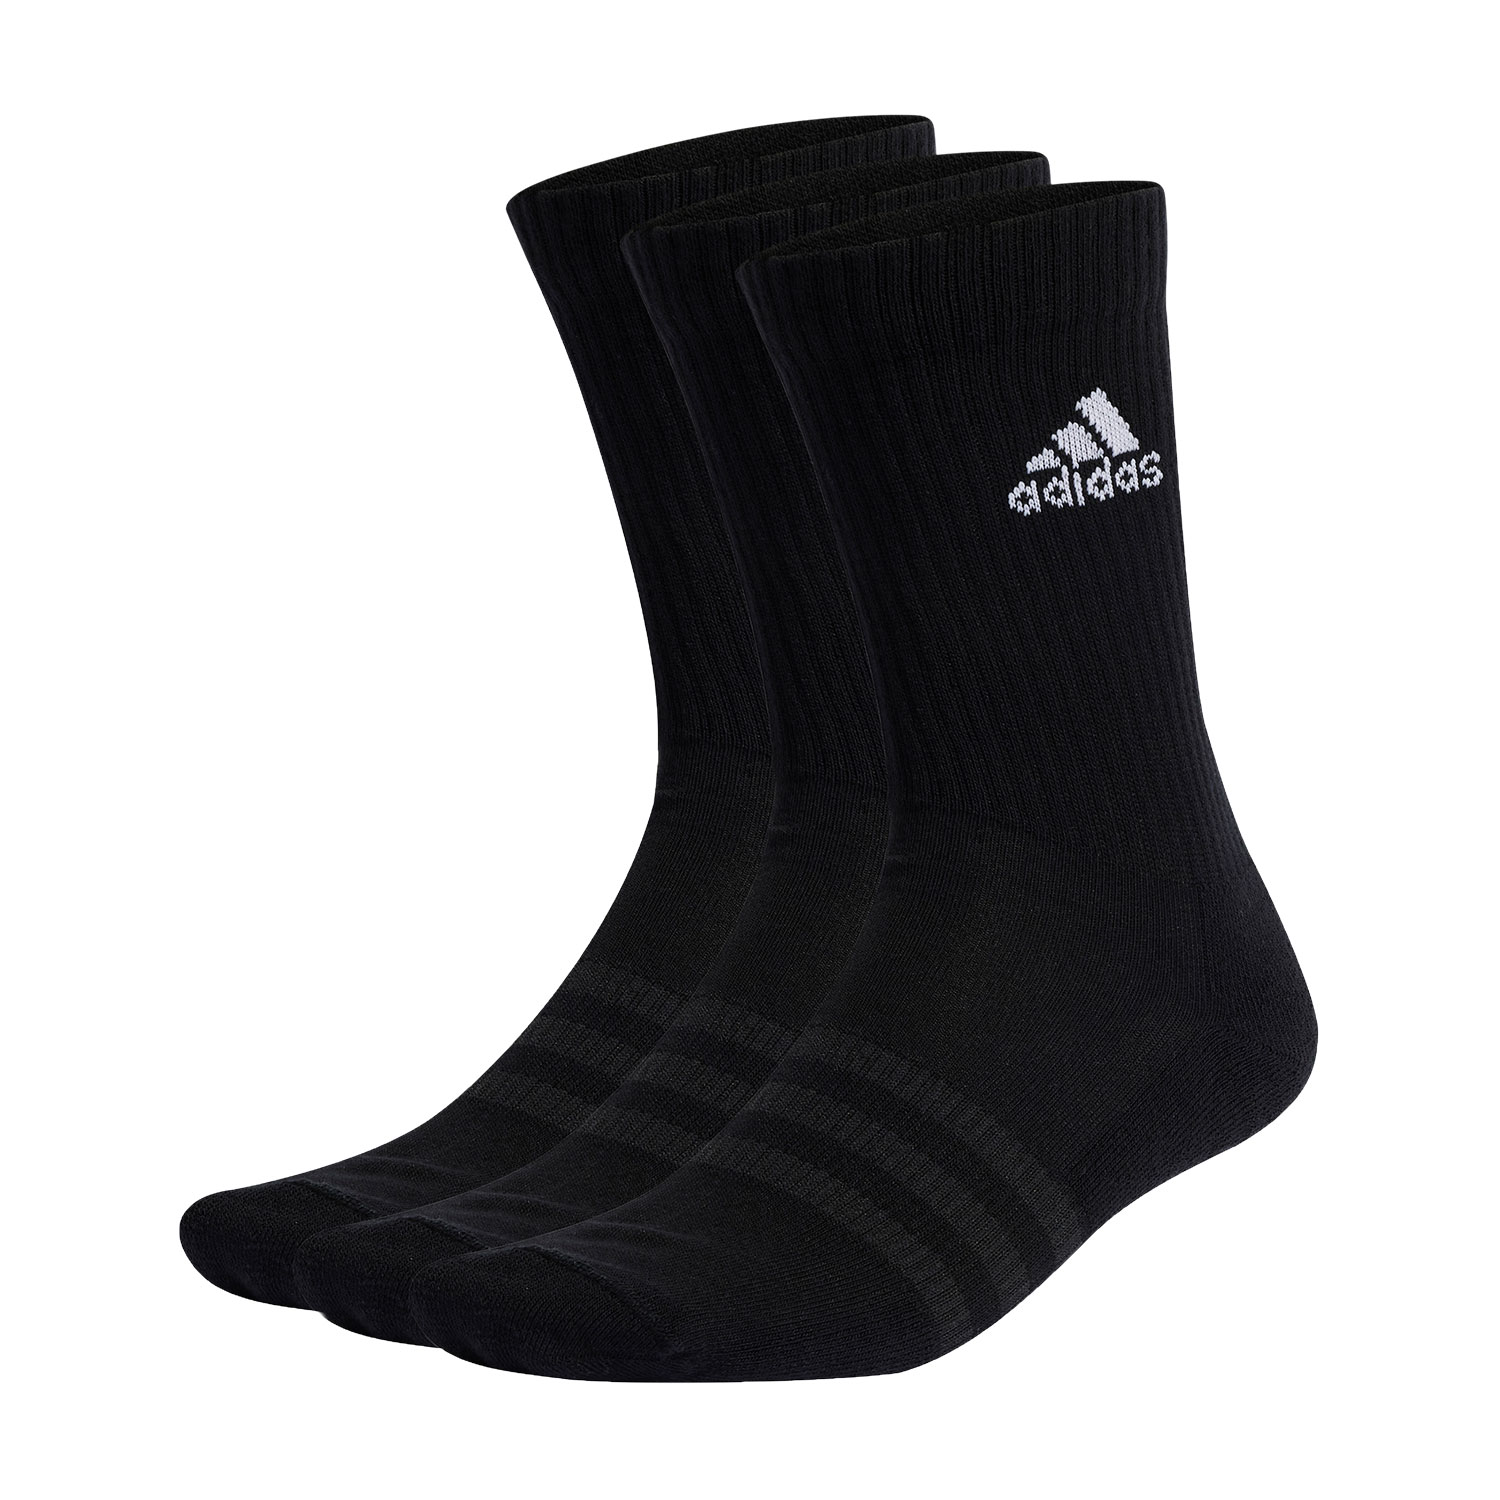 adidas Cushioned x 3 Calcetines - Black/White